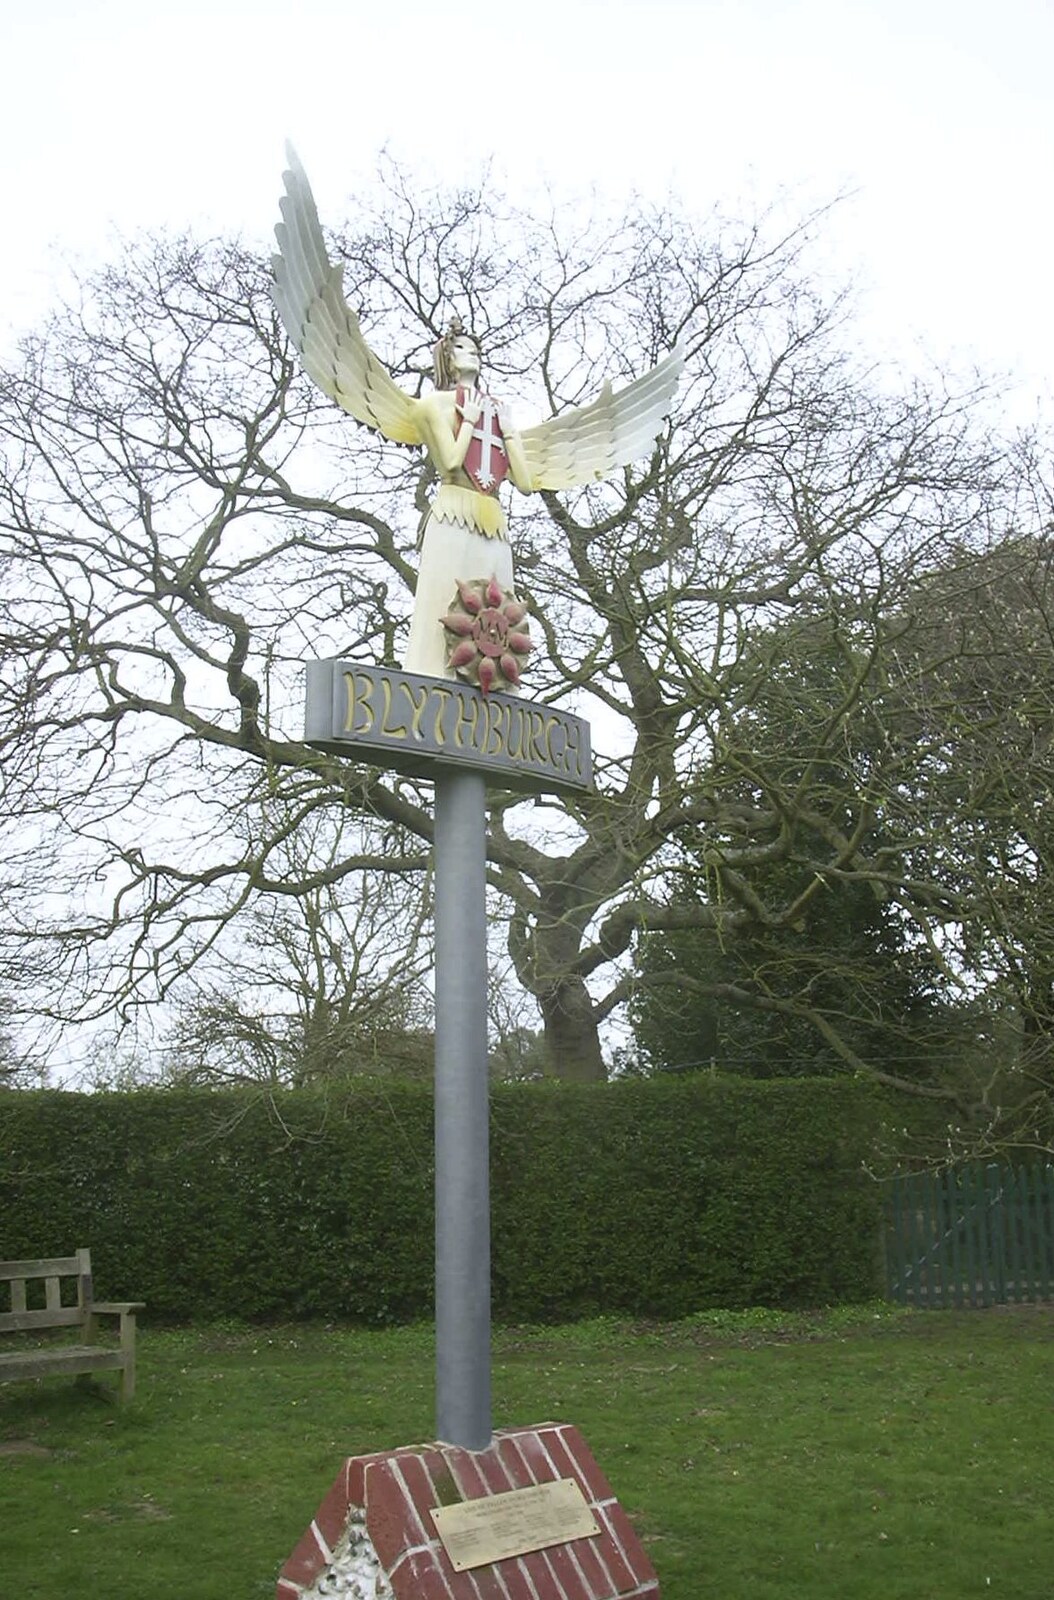 The Blythburgh village sign from Moping in Southwold, Suffolk - 3rd April 2004